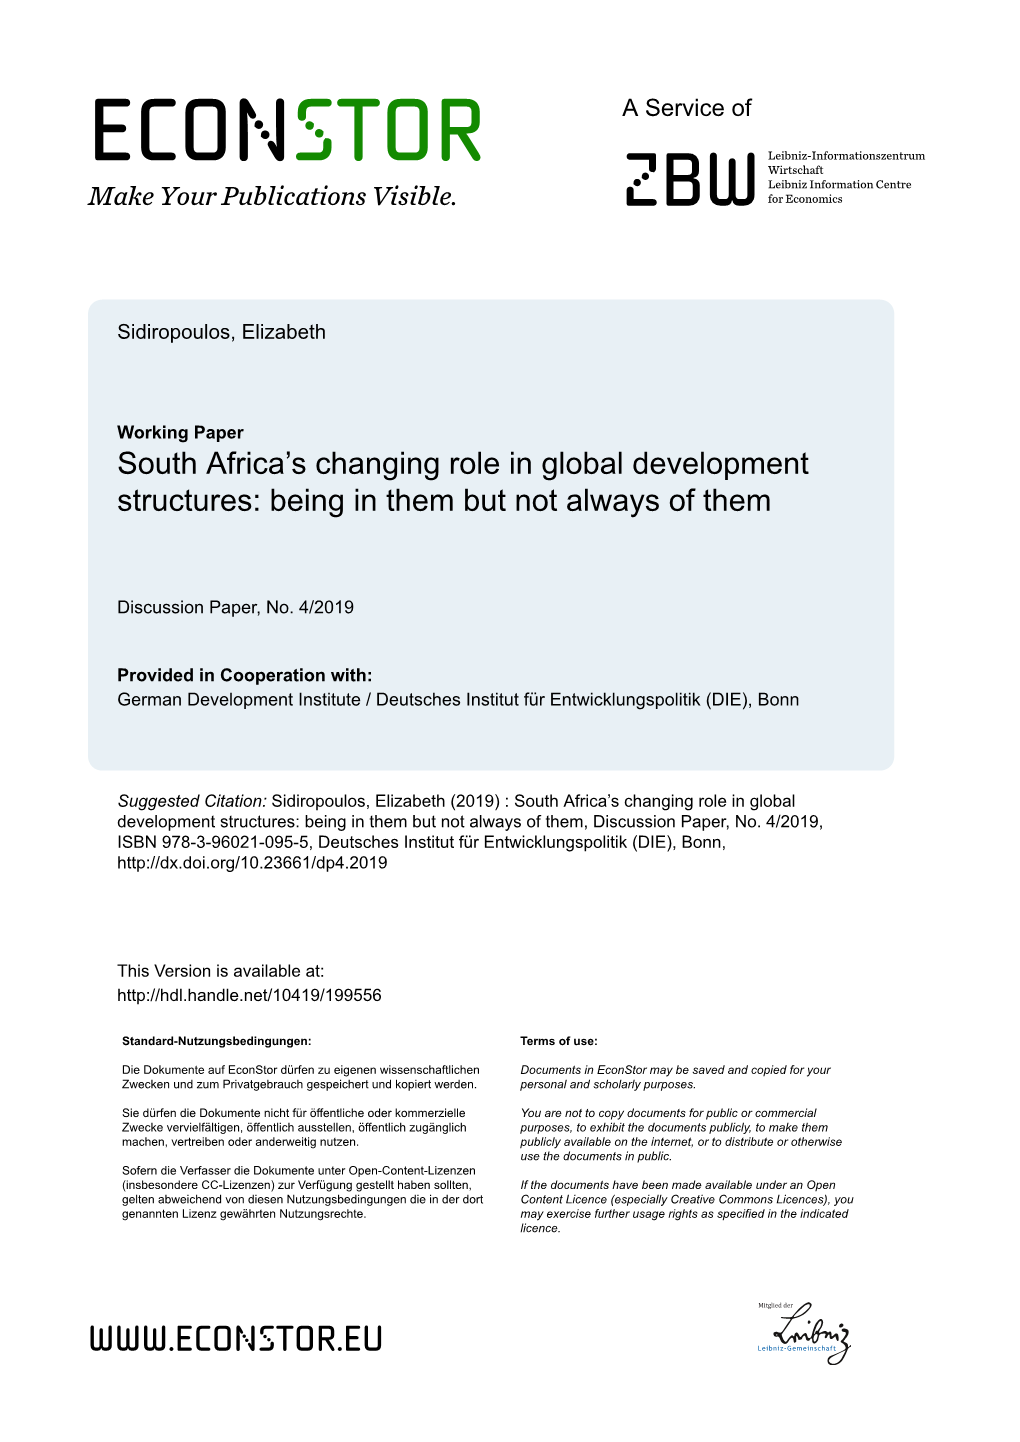 South Africa's Changing Role in Global Development Structures